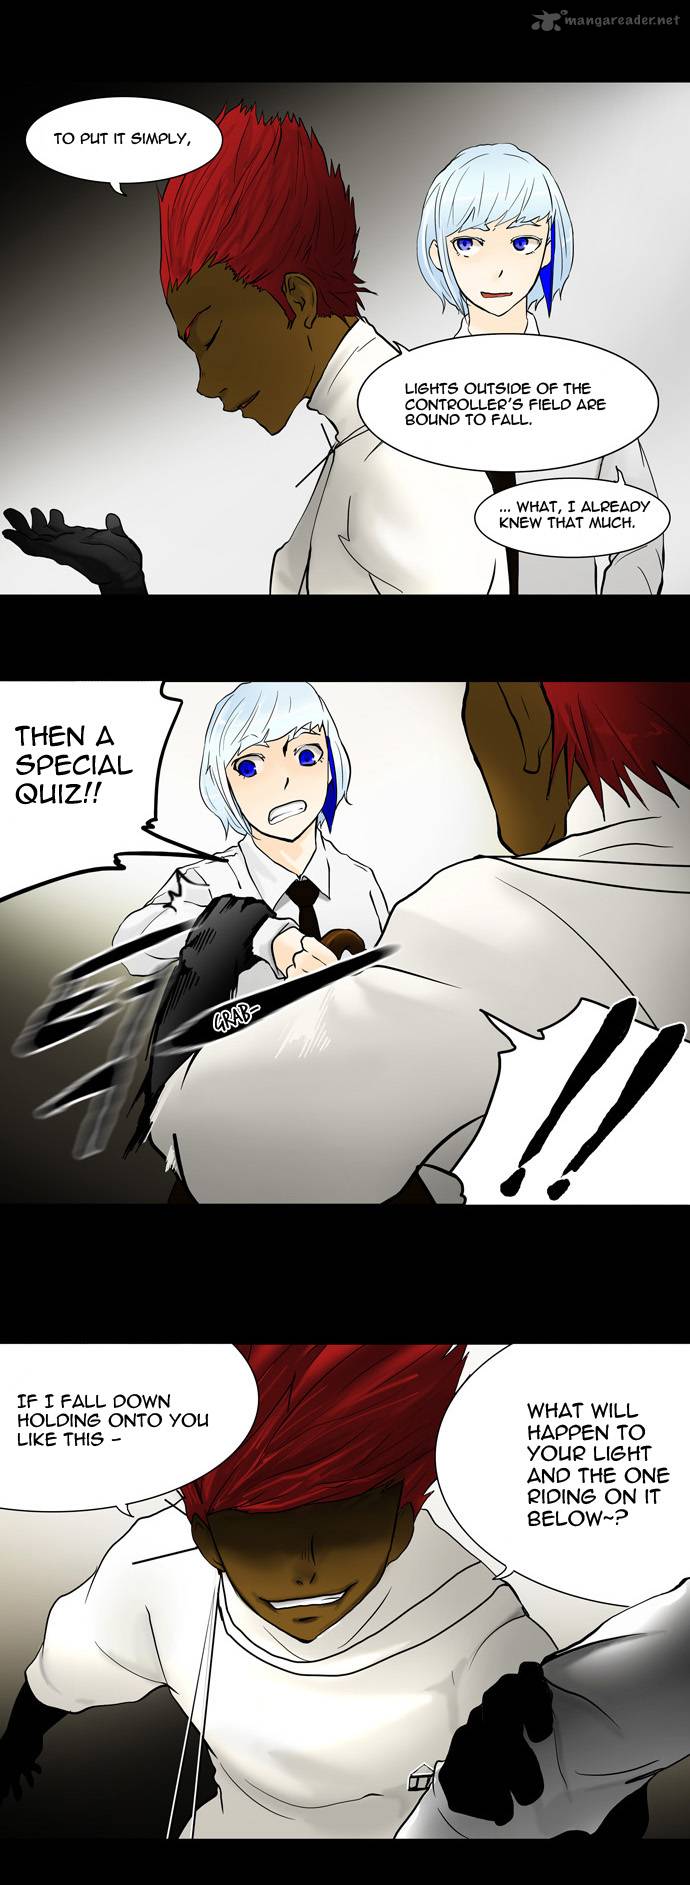 Tower Of God 40 22